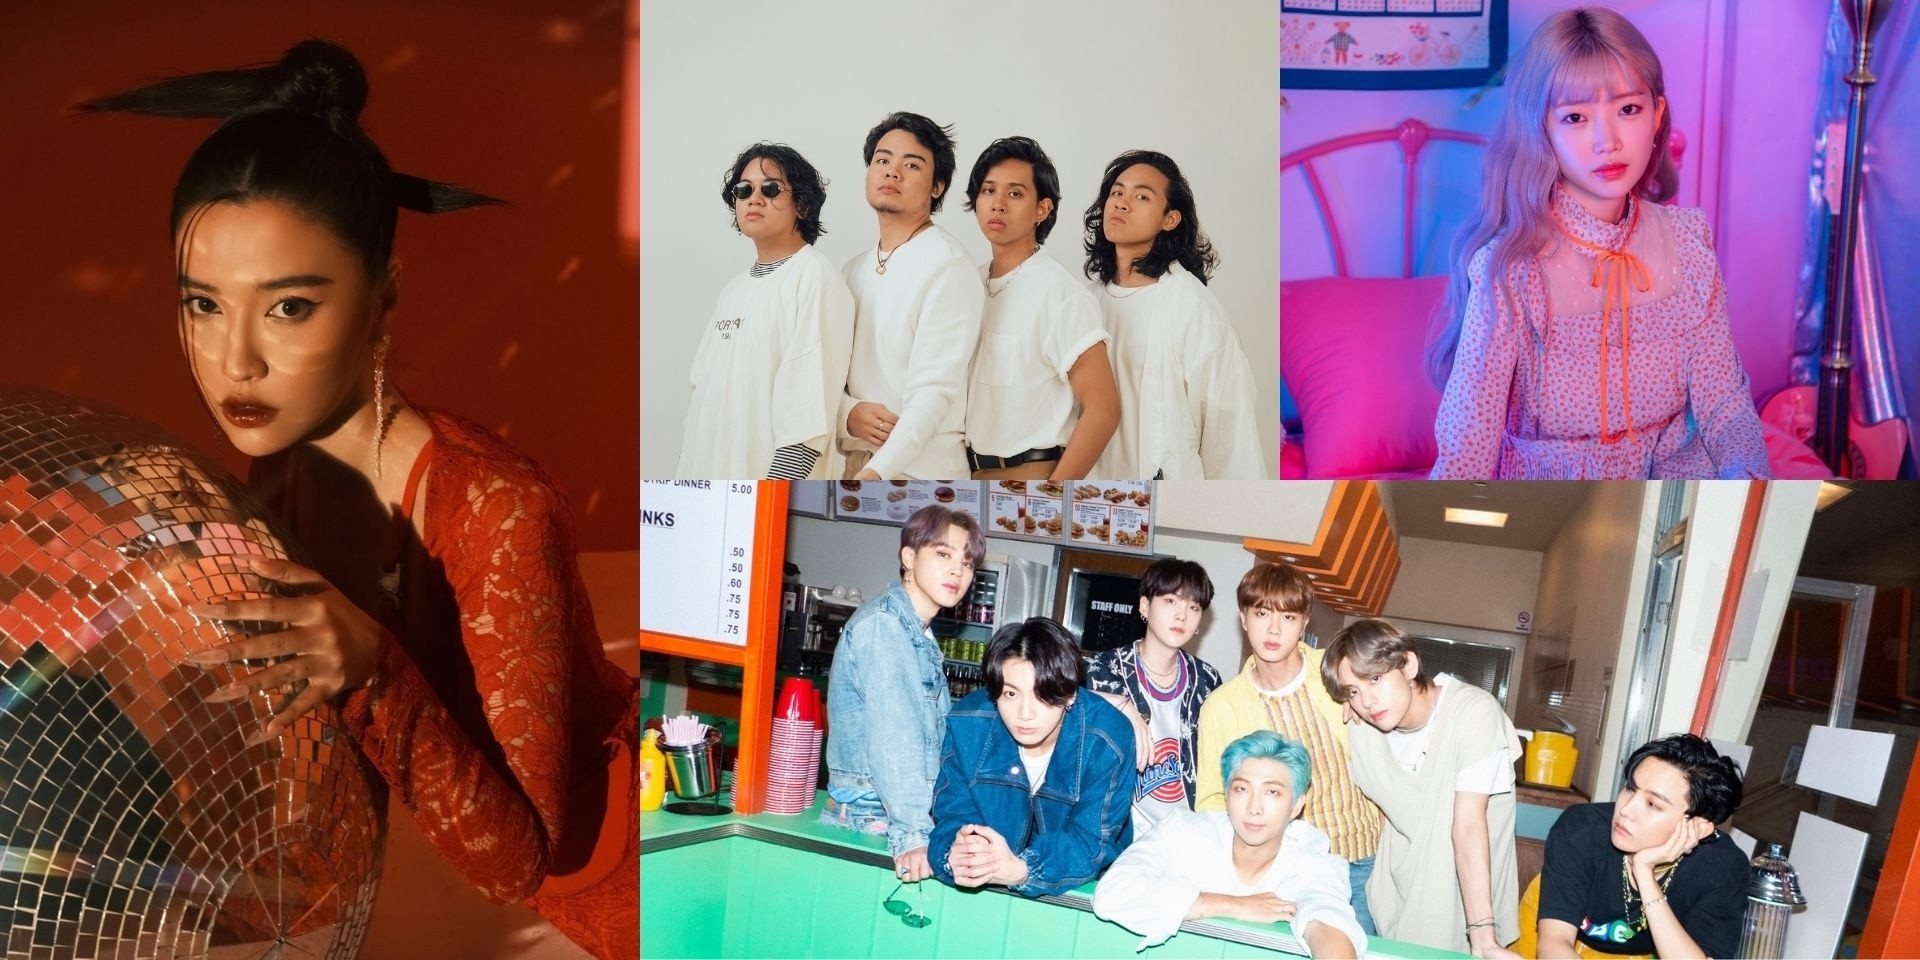 8 retro-inspired Asian songs for getting your groove on — including tracks from BTS, YUKIKA, One Click Straight, and more 